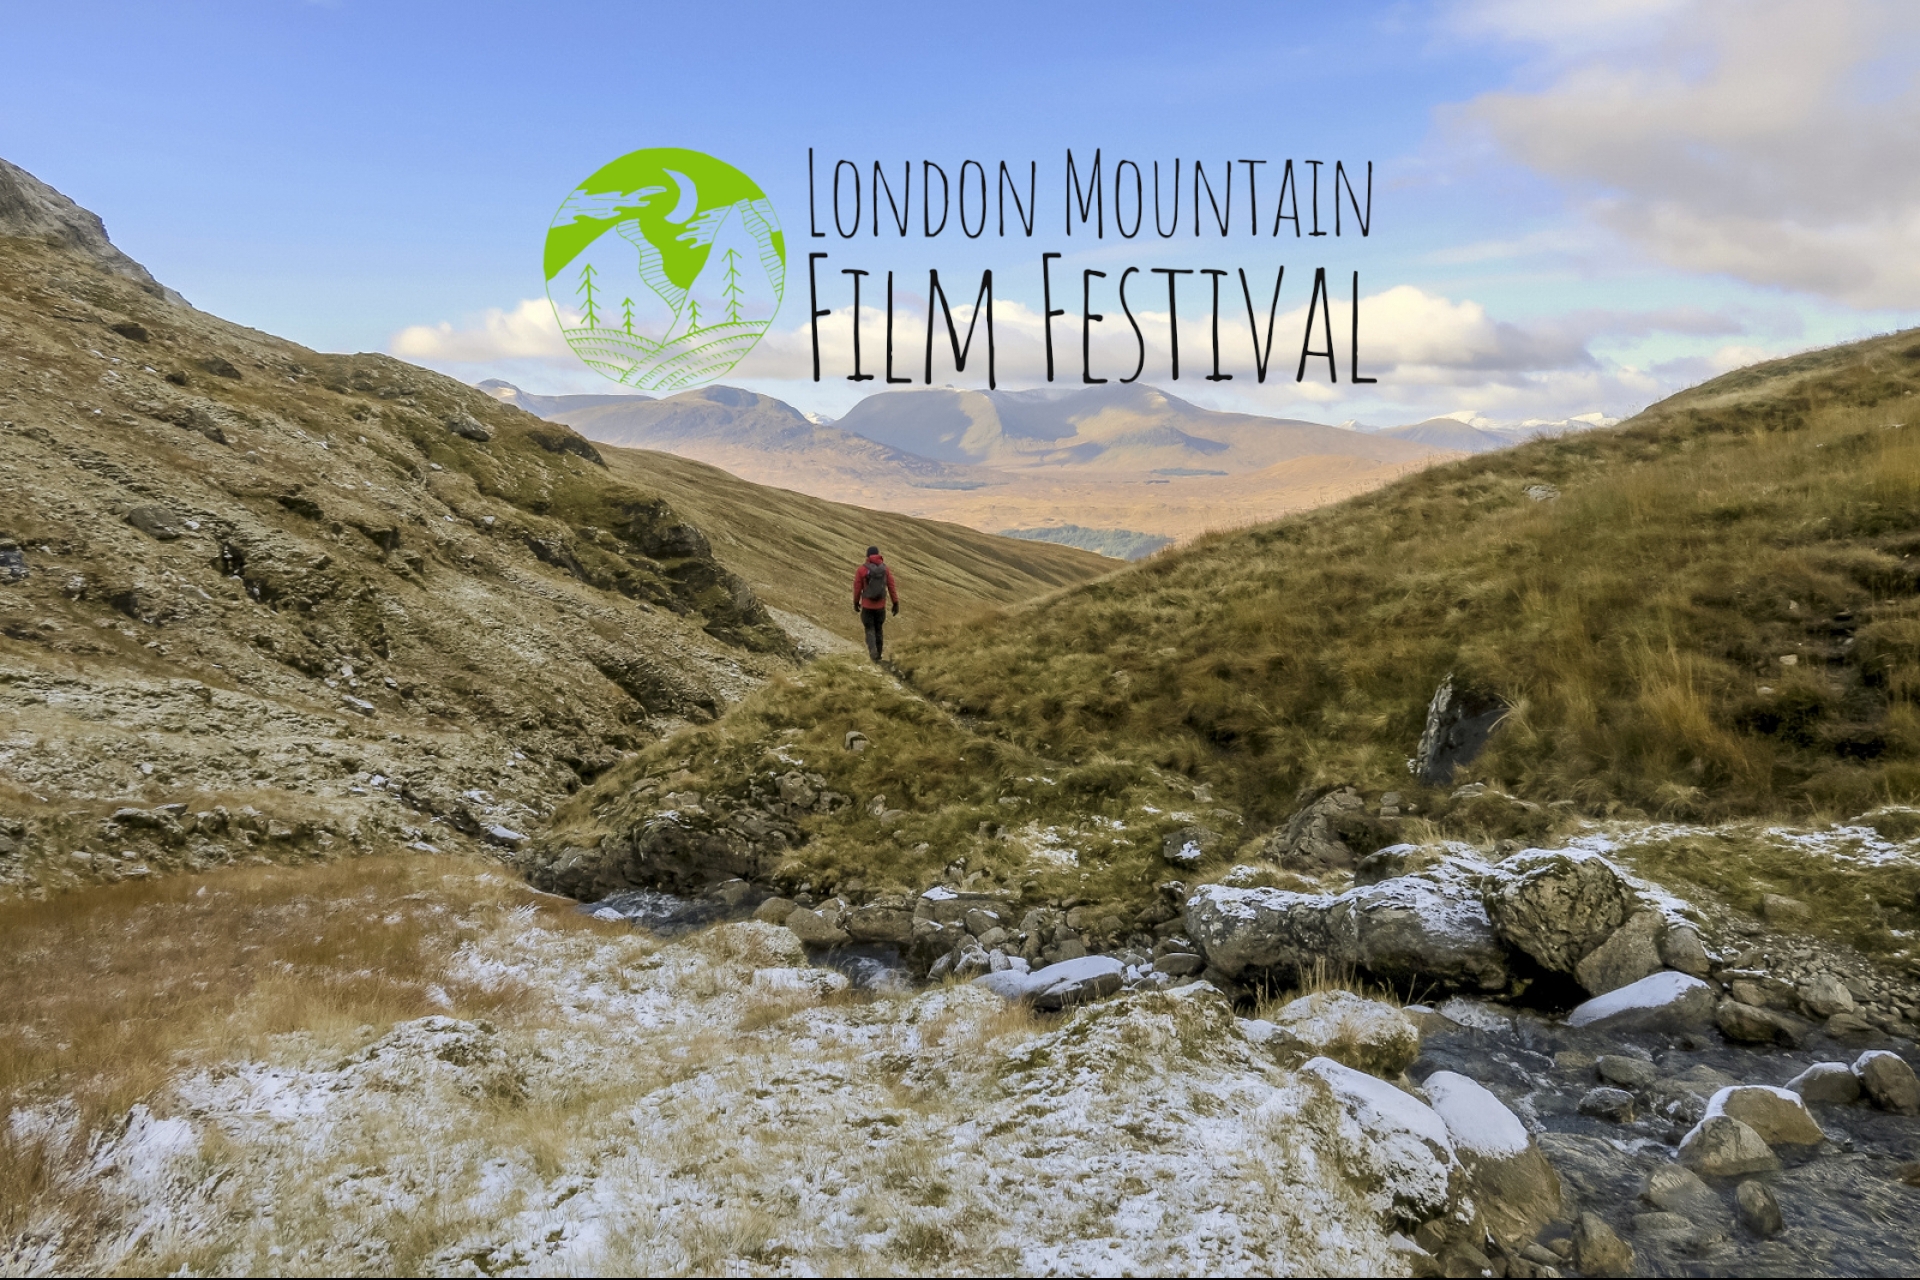 Books to celebrate the Outdoors, with the London Mountain Film Festival